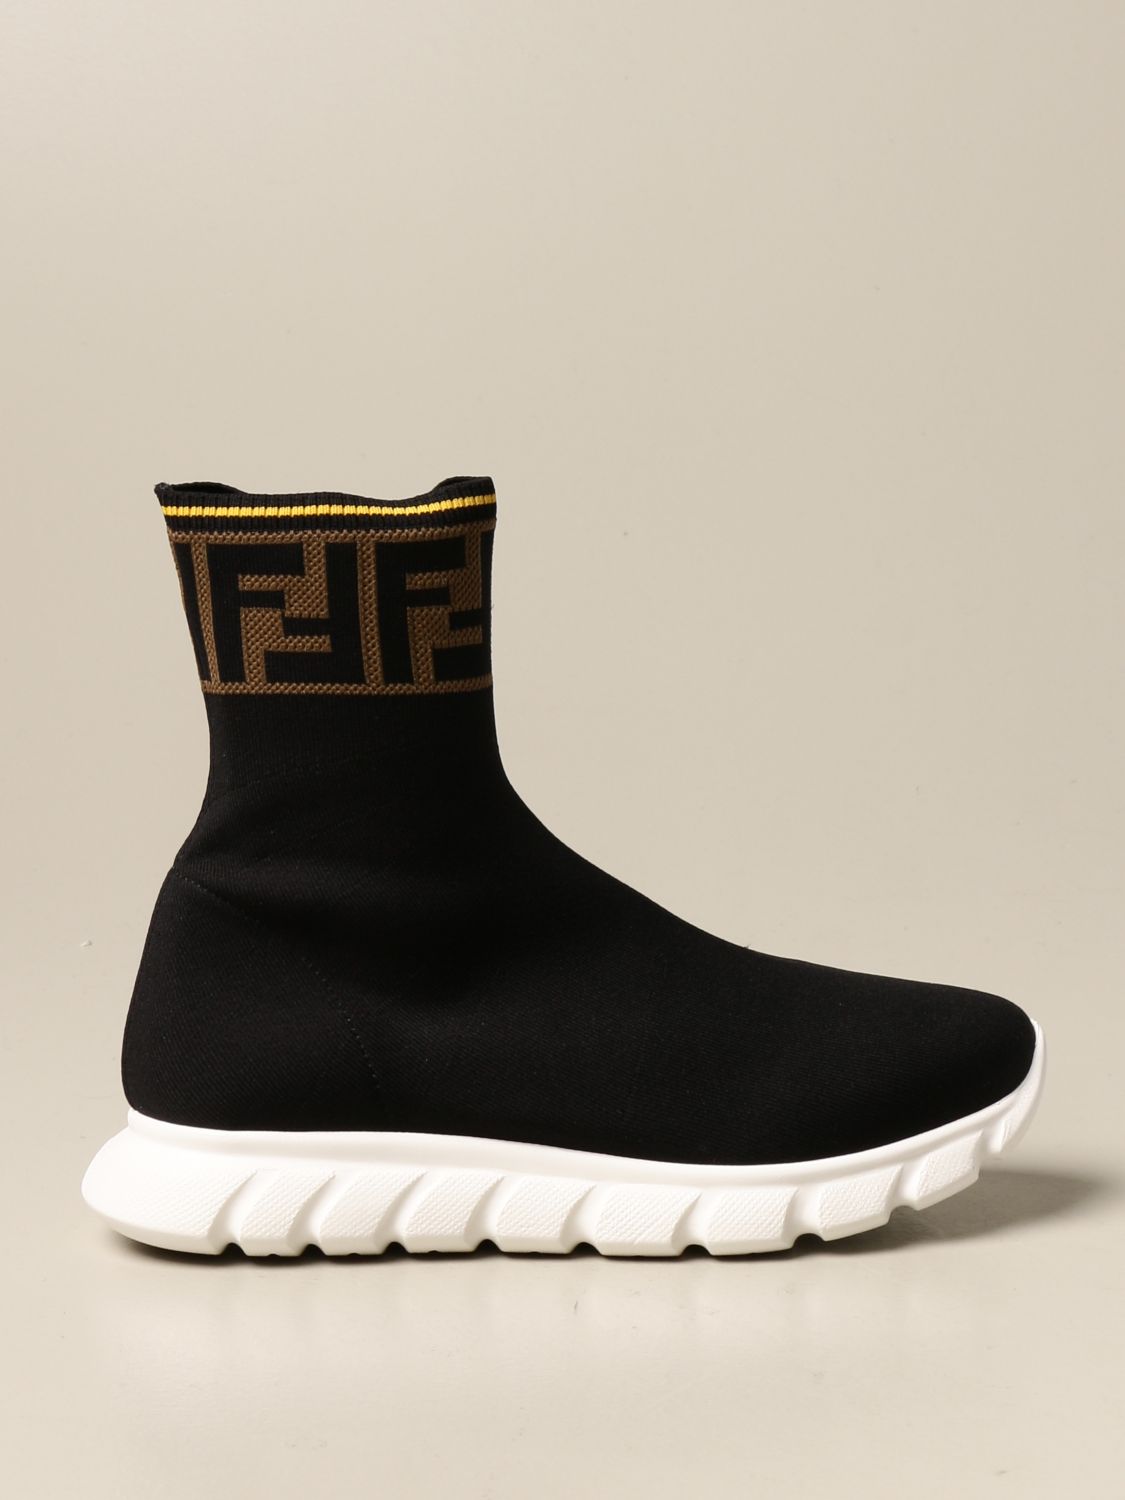 FENDI: sneakers in stretch knit | Shoes 